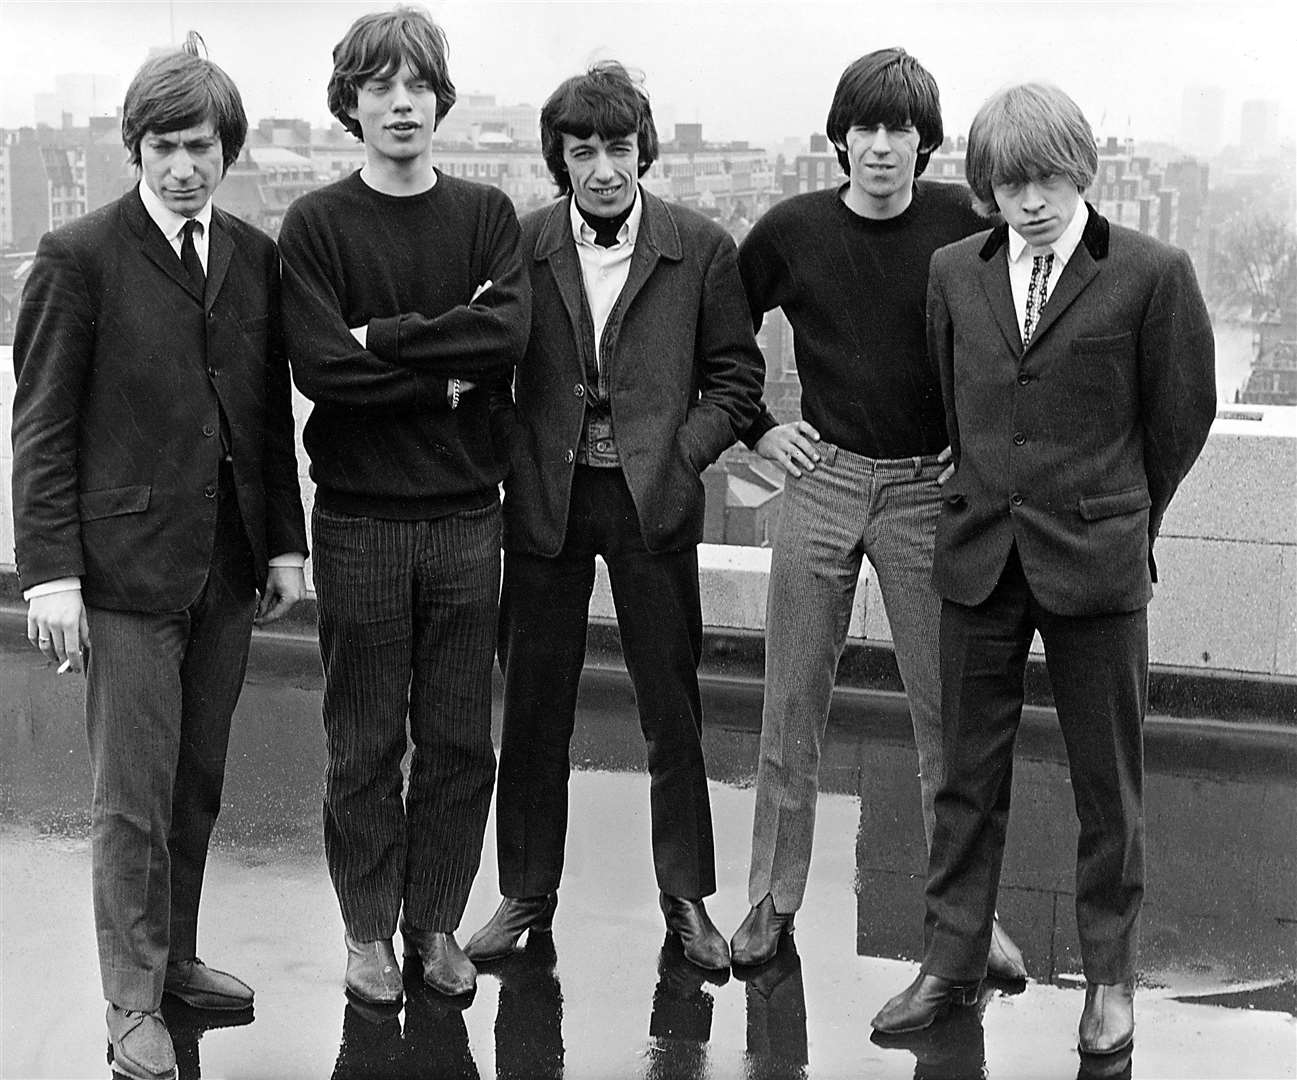 The Rolling Stones in London, 1964, Left to right: Charlie Watts, Mick Jagger, Bill Wyman, Keith Richards and Brian Jones.